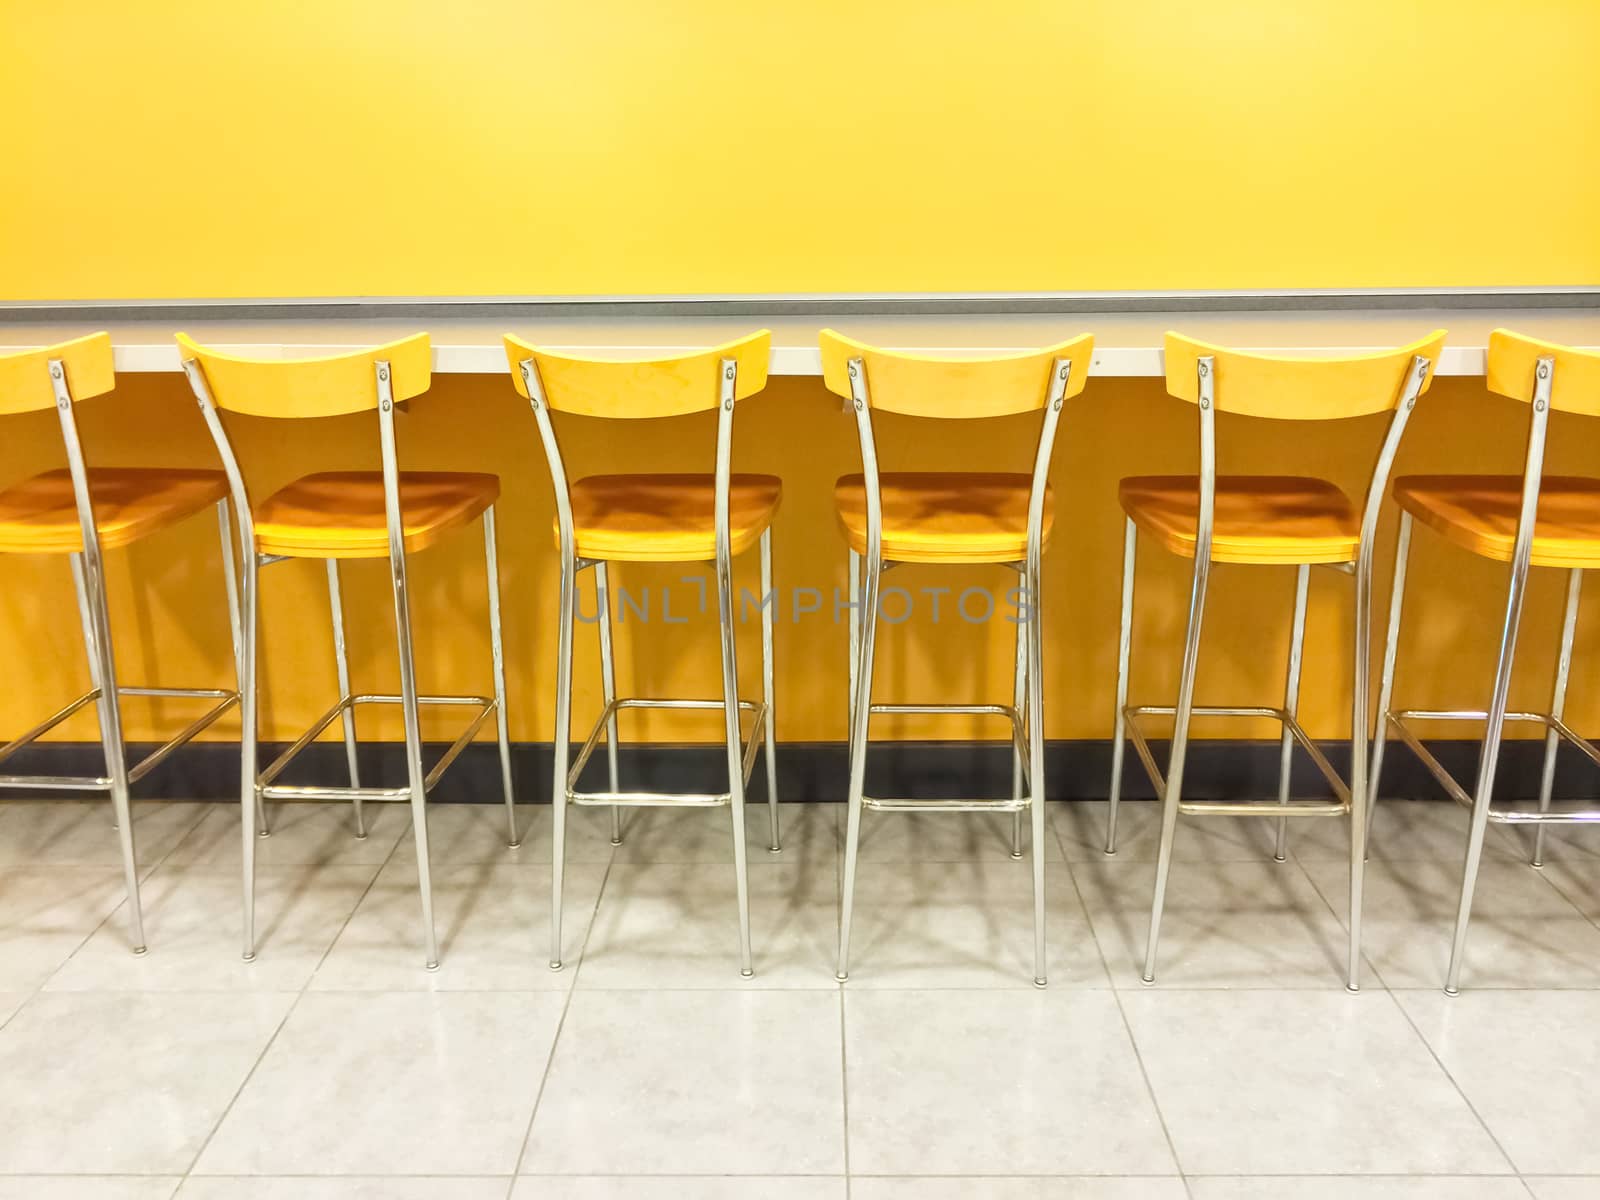 Raw of yellow chairs in a cafeteria by anikasalsera